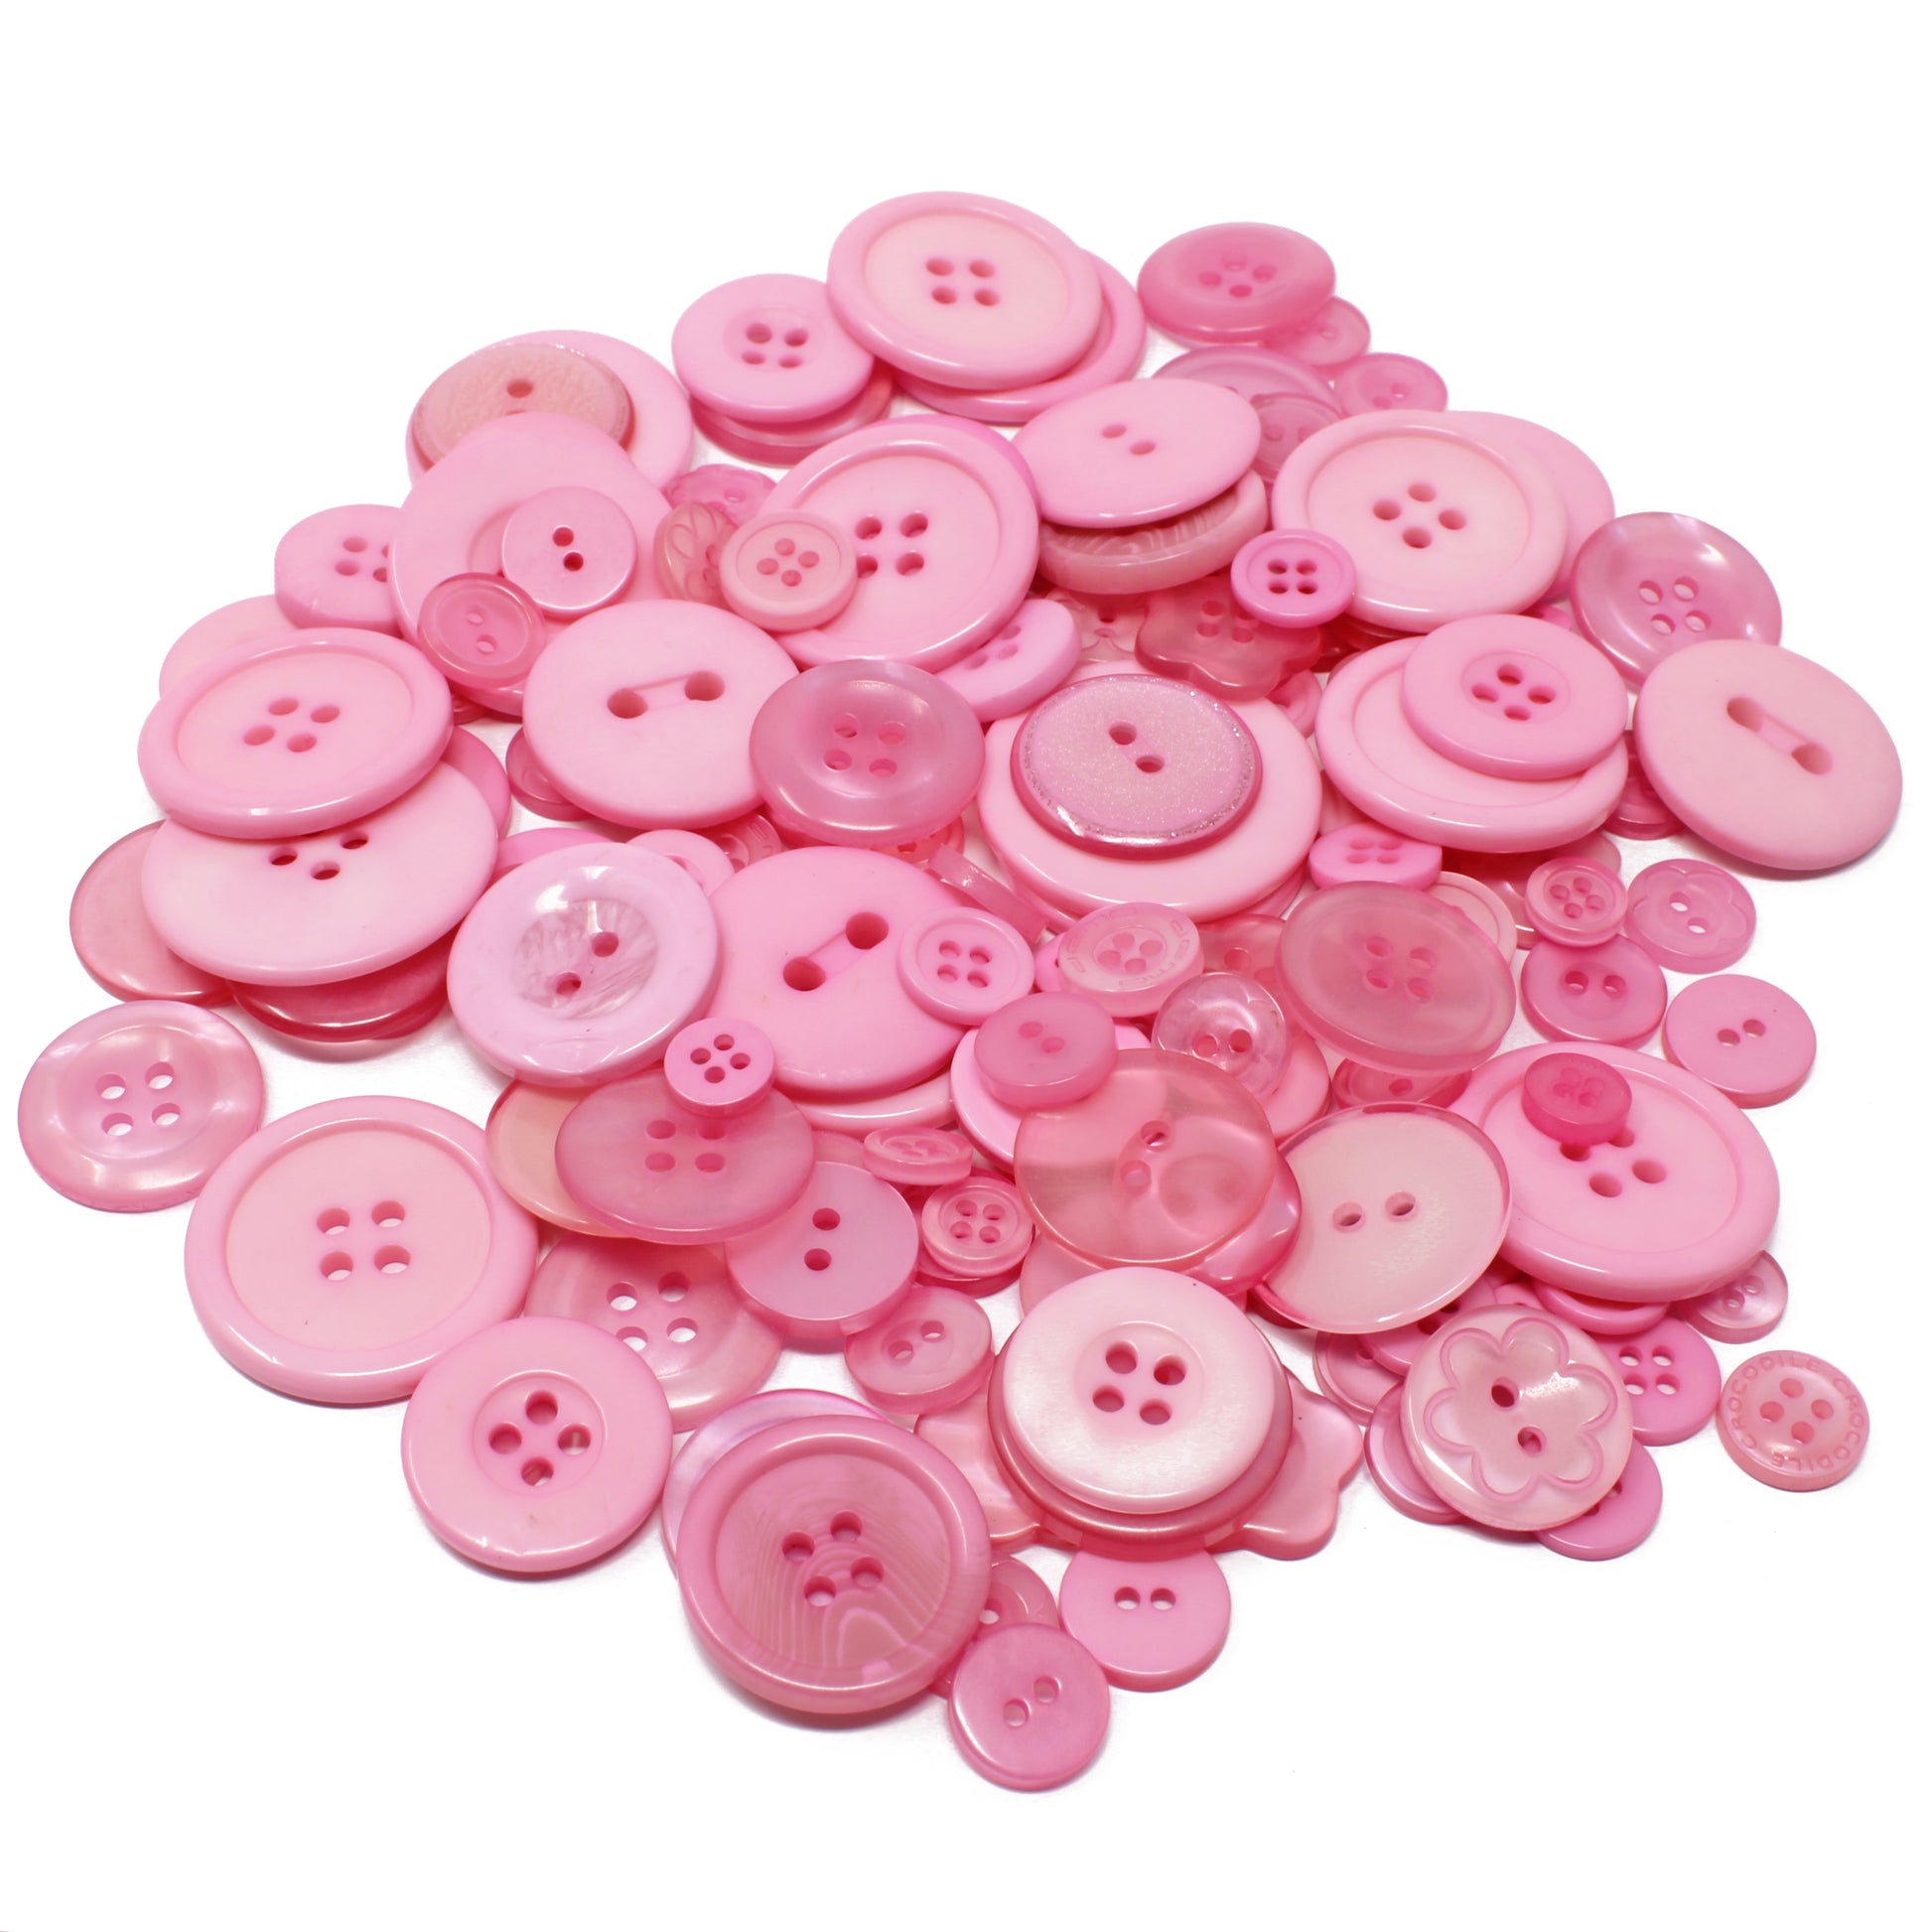 Pink 100g Bags Of Mix Acrylic & Resin Buttons